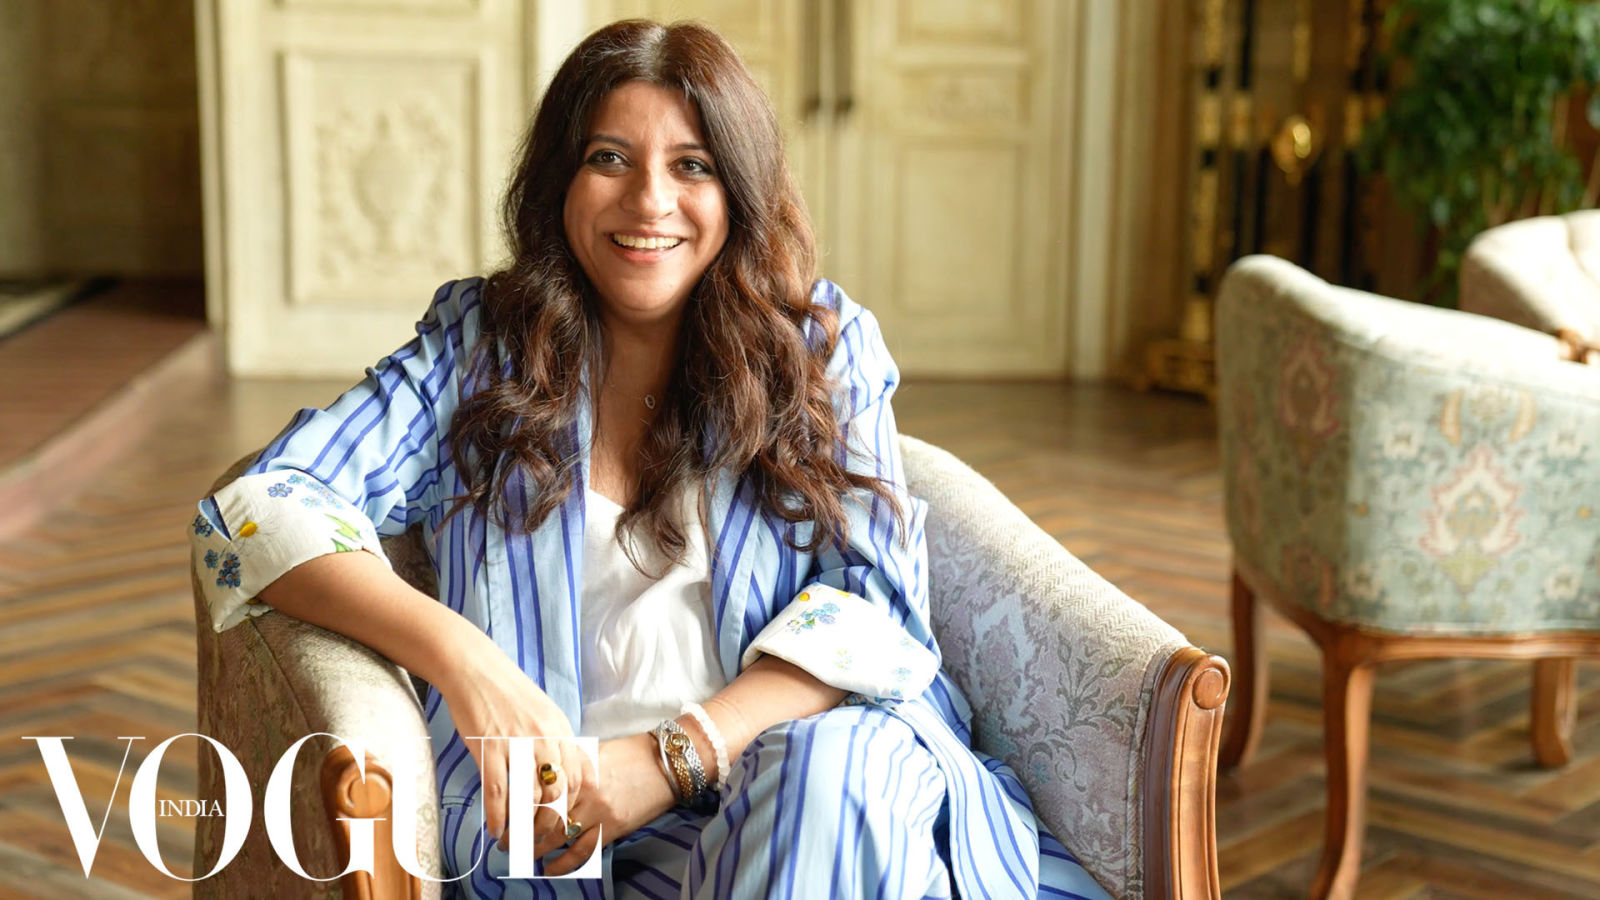 In conversation with Zoya Akhtar on The Archies